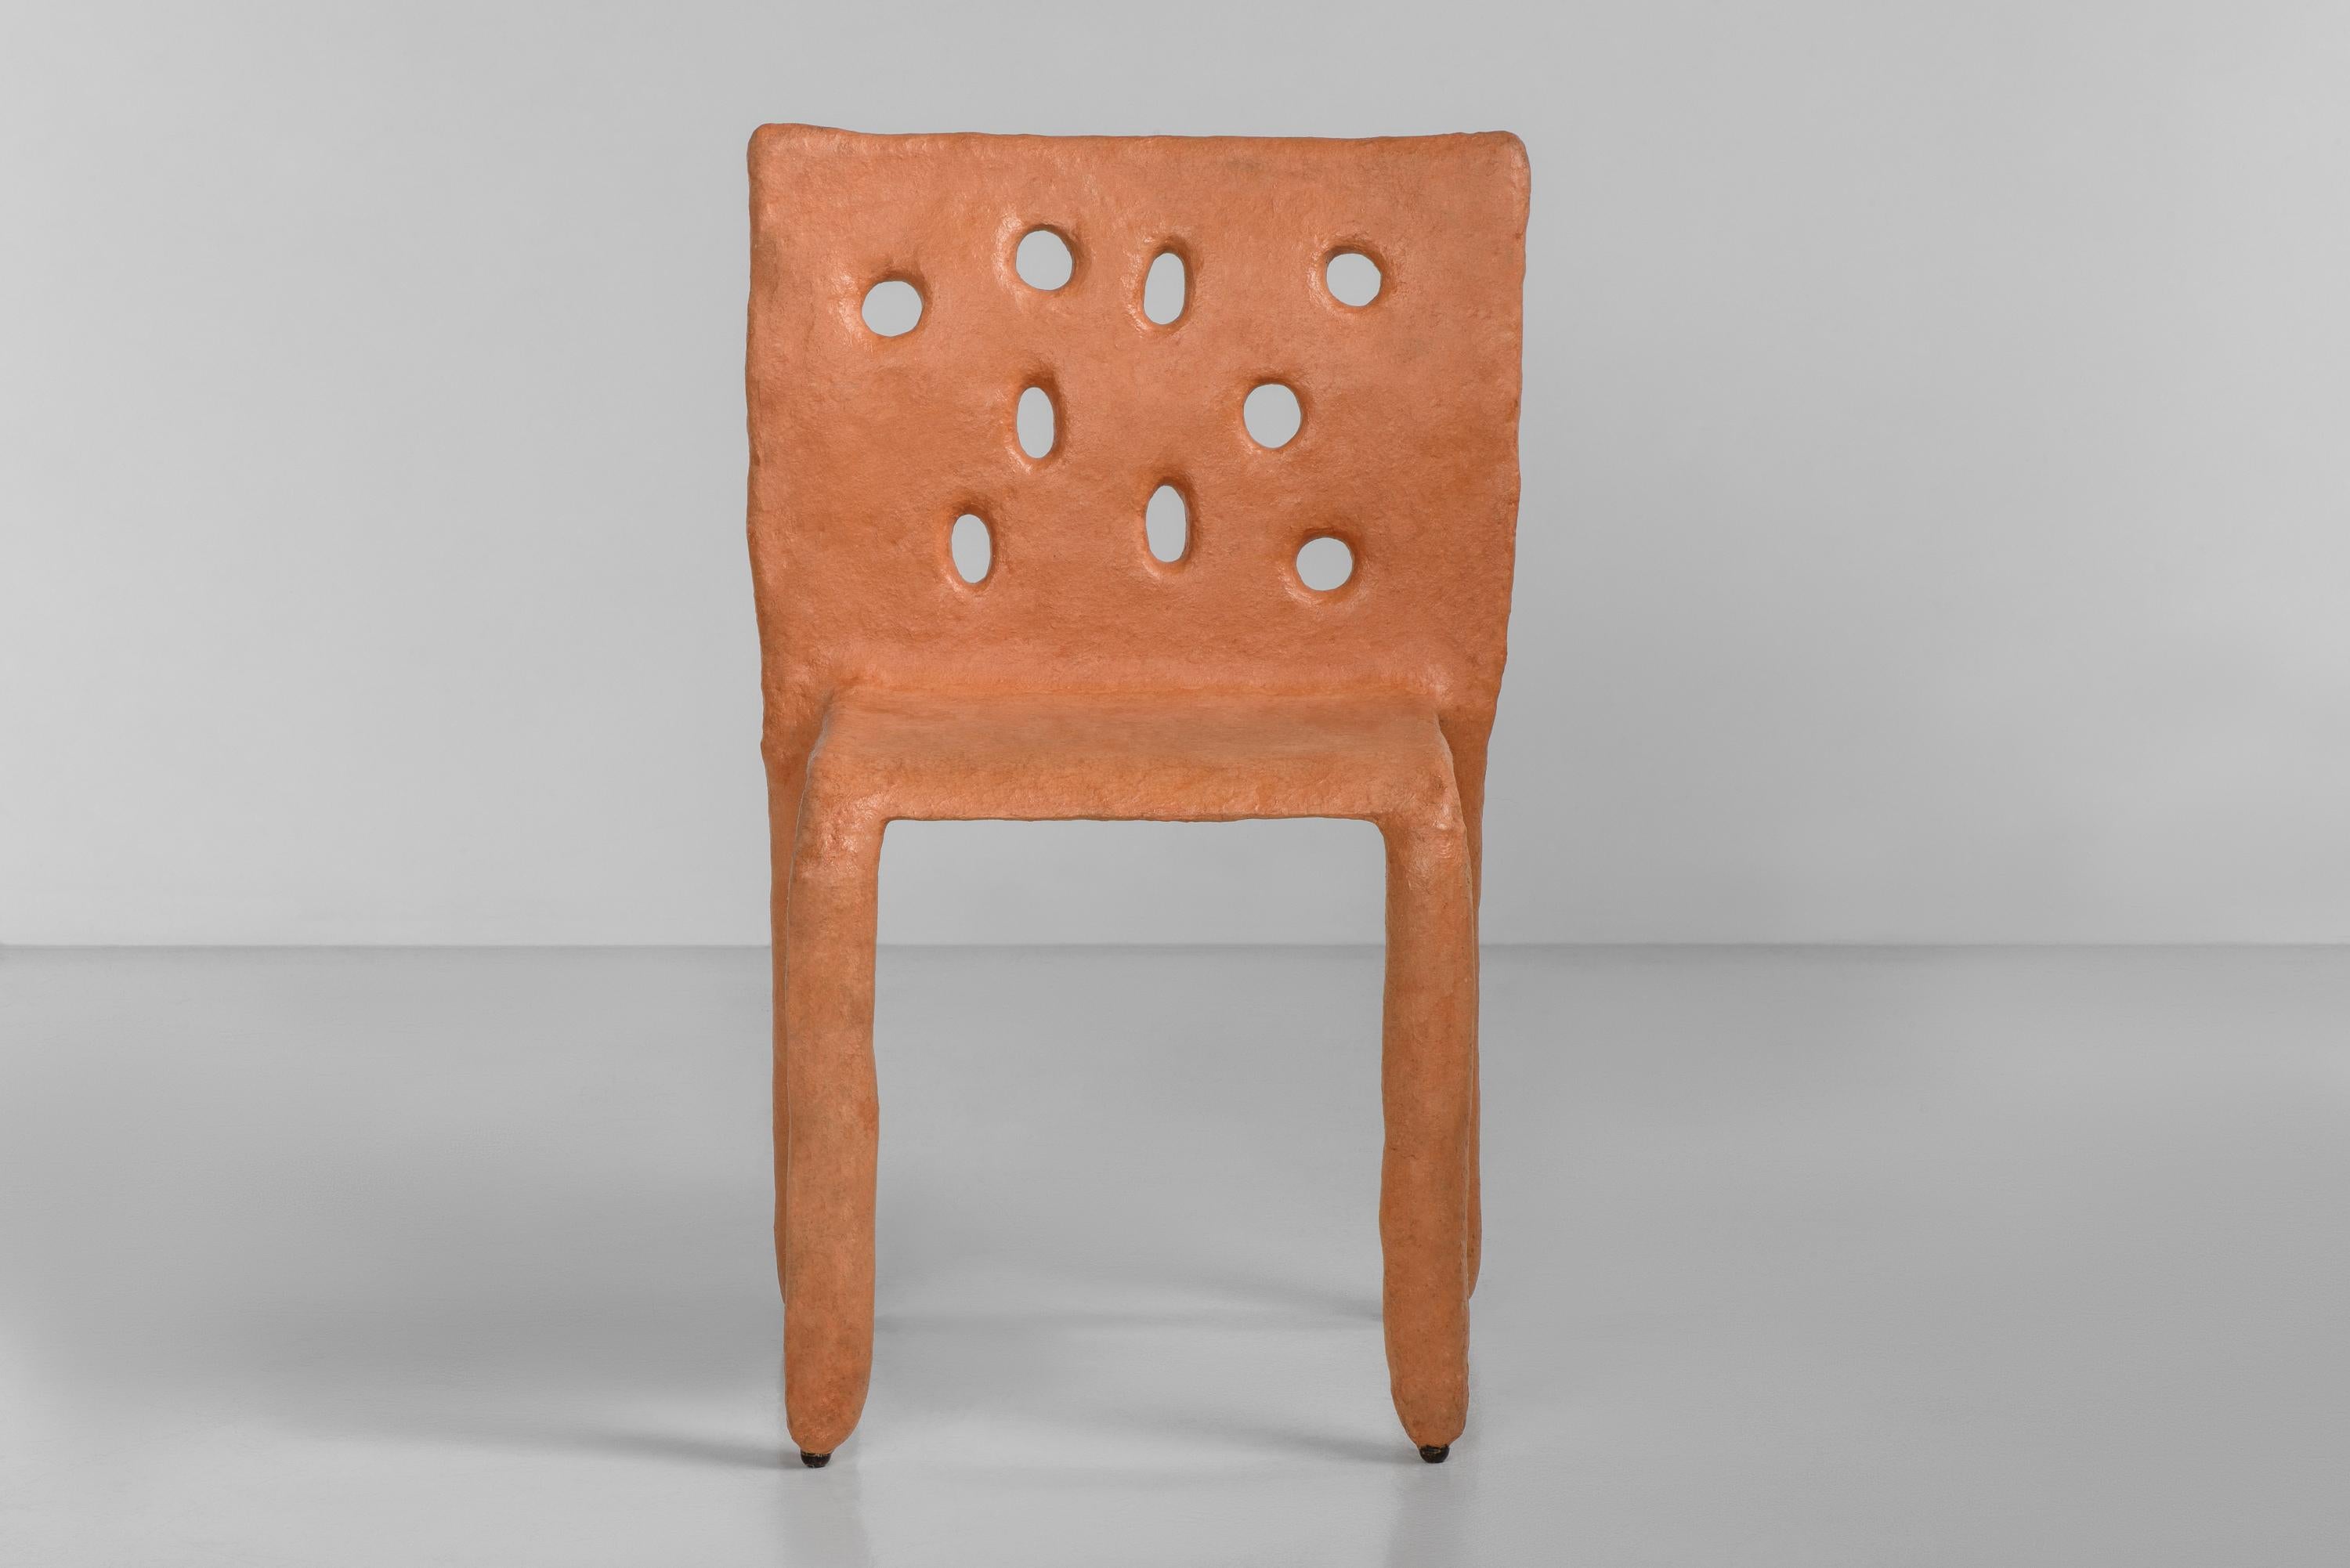 Sculpted Outdoor contemporary chair by FAINA
Design: Victoriya Yakusha
Material: steel, flax rubber, biopolymer, cellulose
Dimensions: Height 82 x width 54 x legs depth 45 cm
 Weight: 15 kilos.

Made in the style of ethnic minimalism, the collection